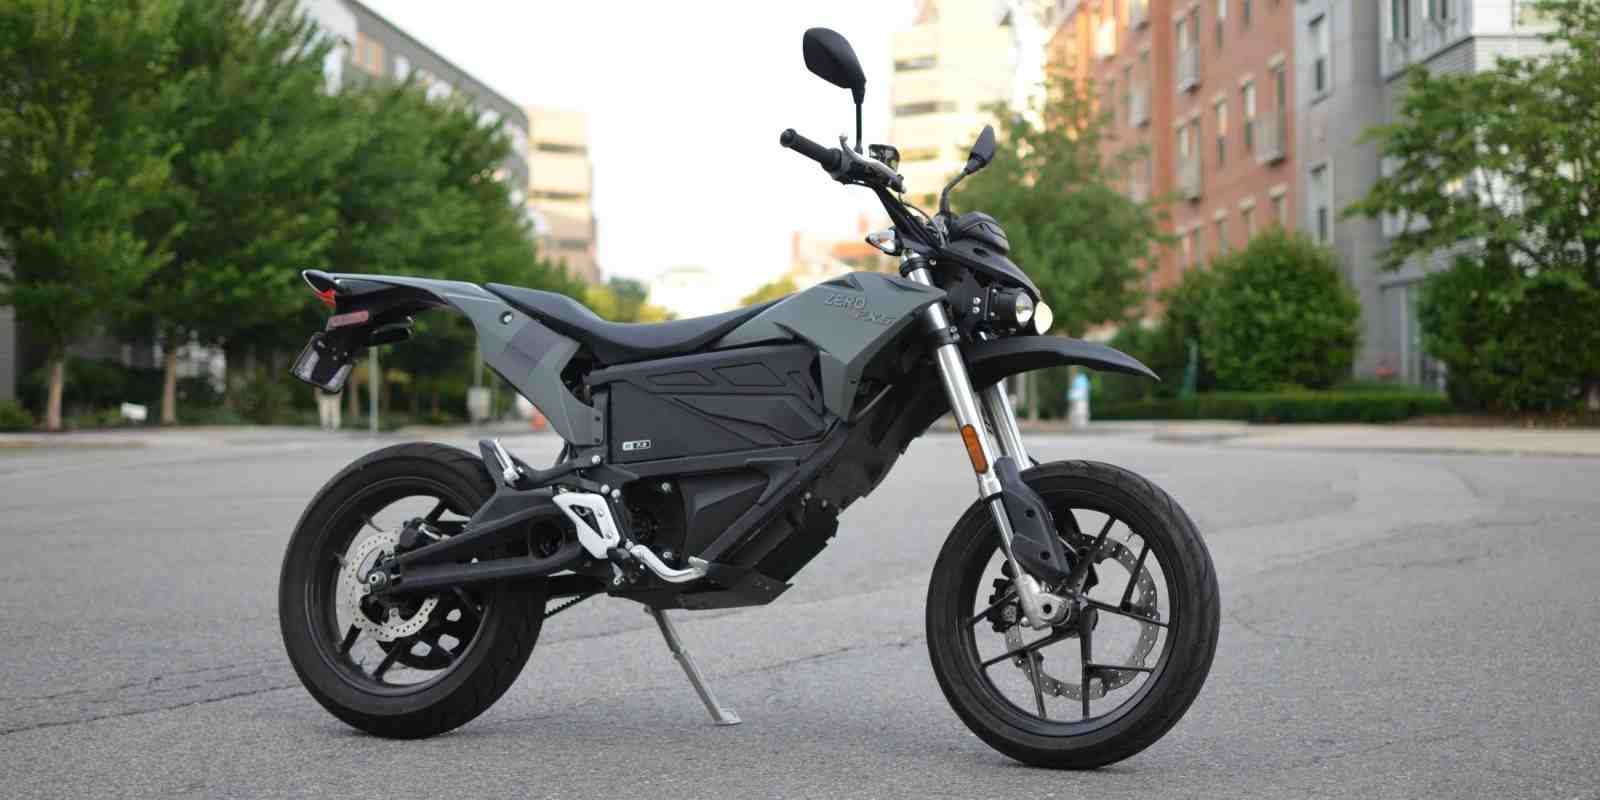 Are electric bikes considered motorized vehicles?